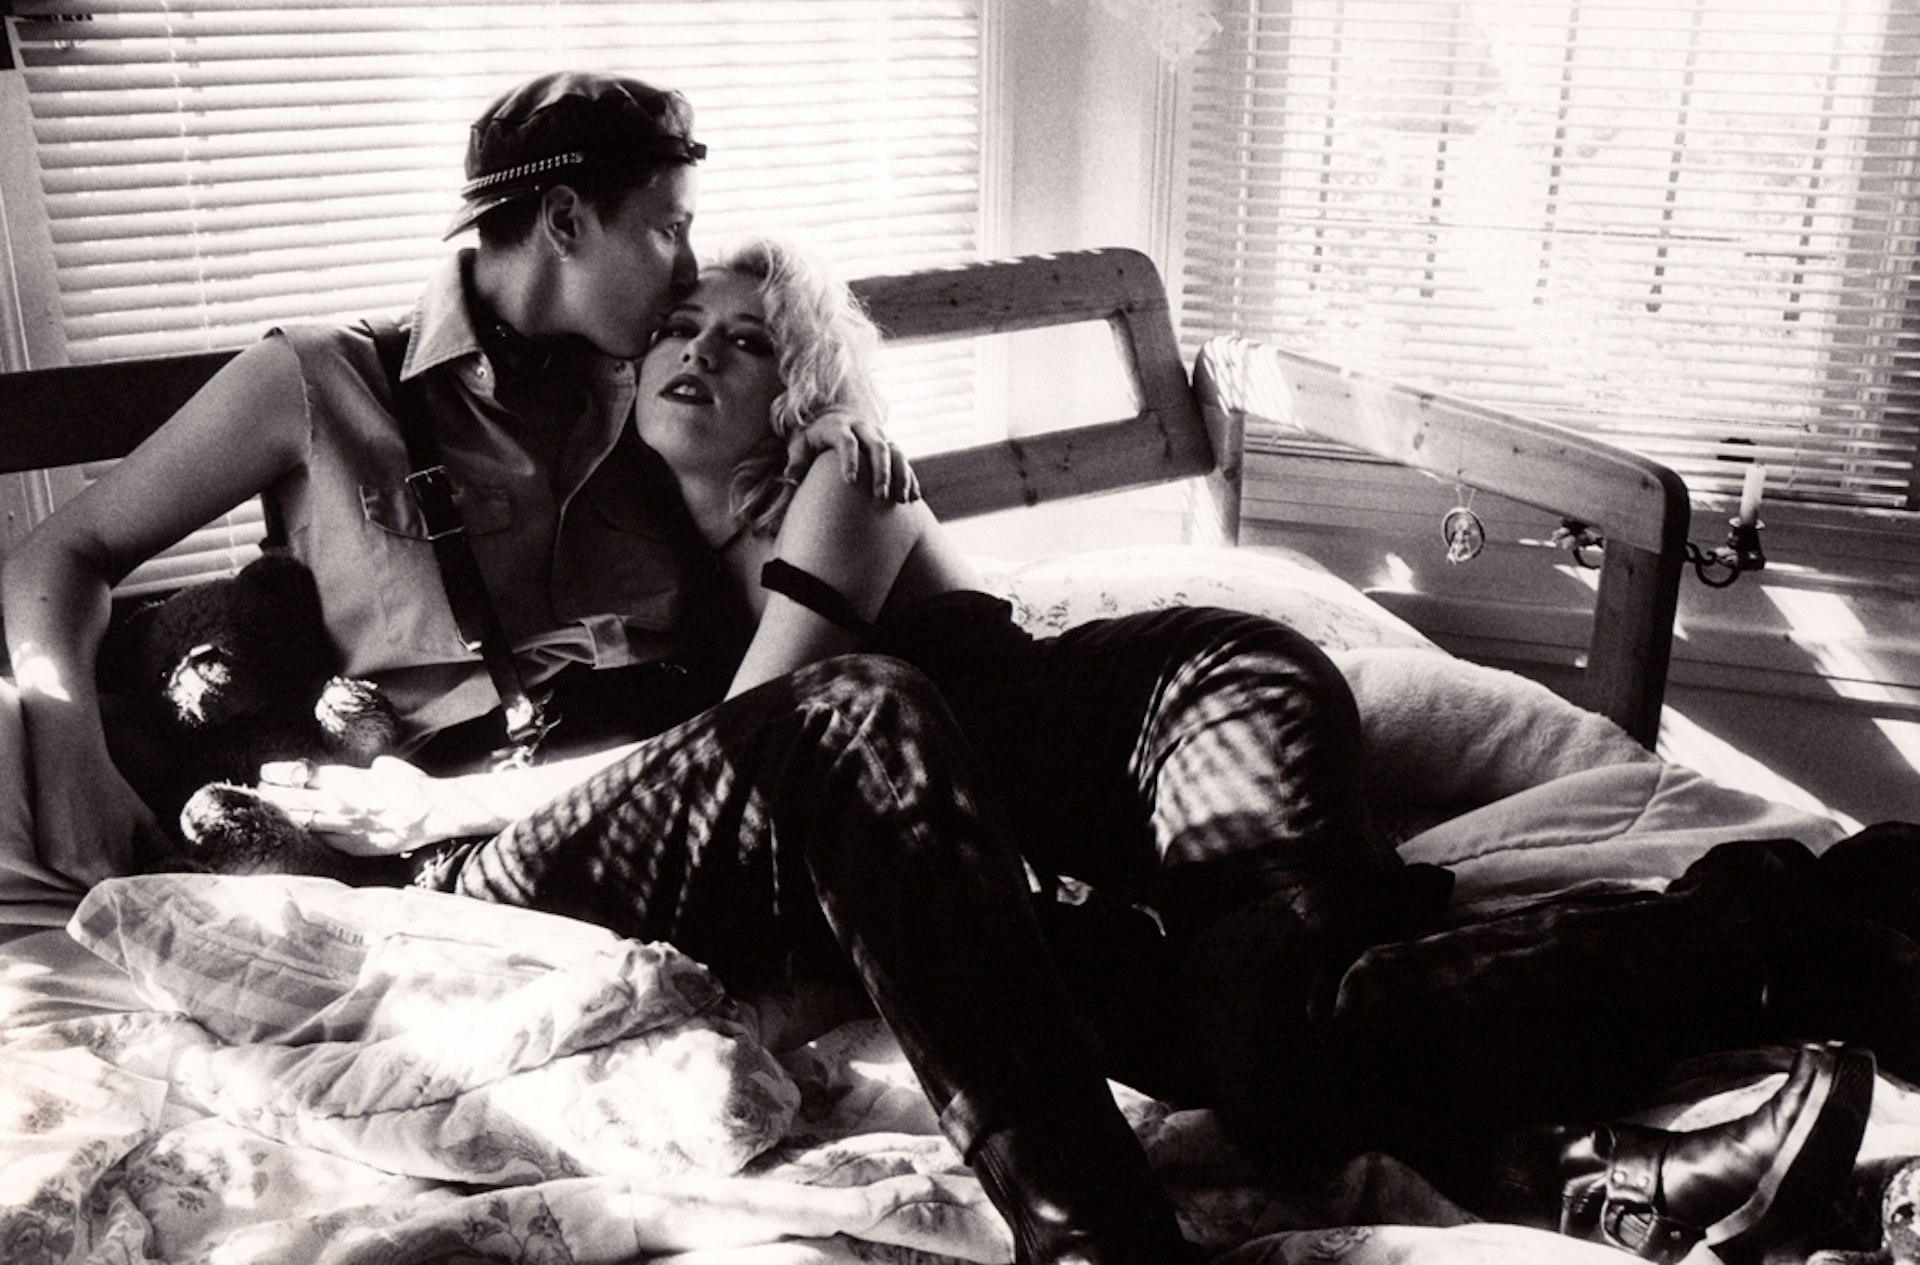 Chronicling lesbian life in San Francisco in the ’90s